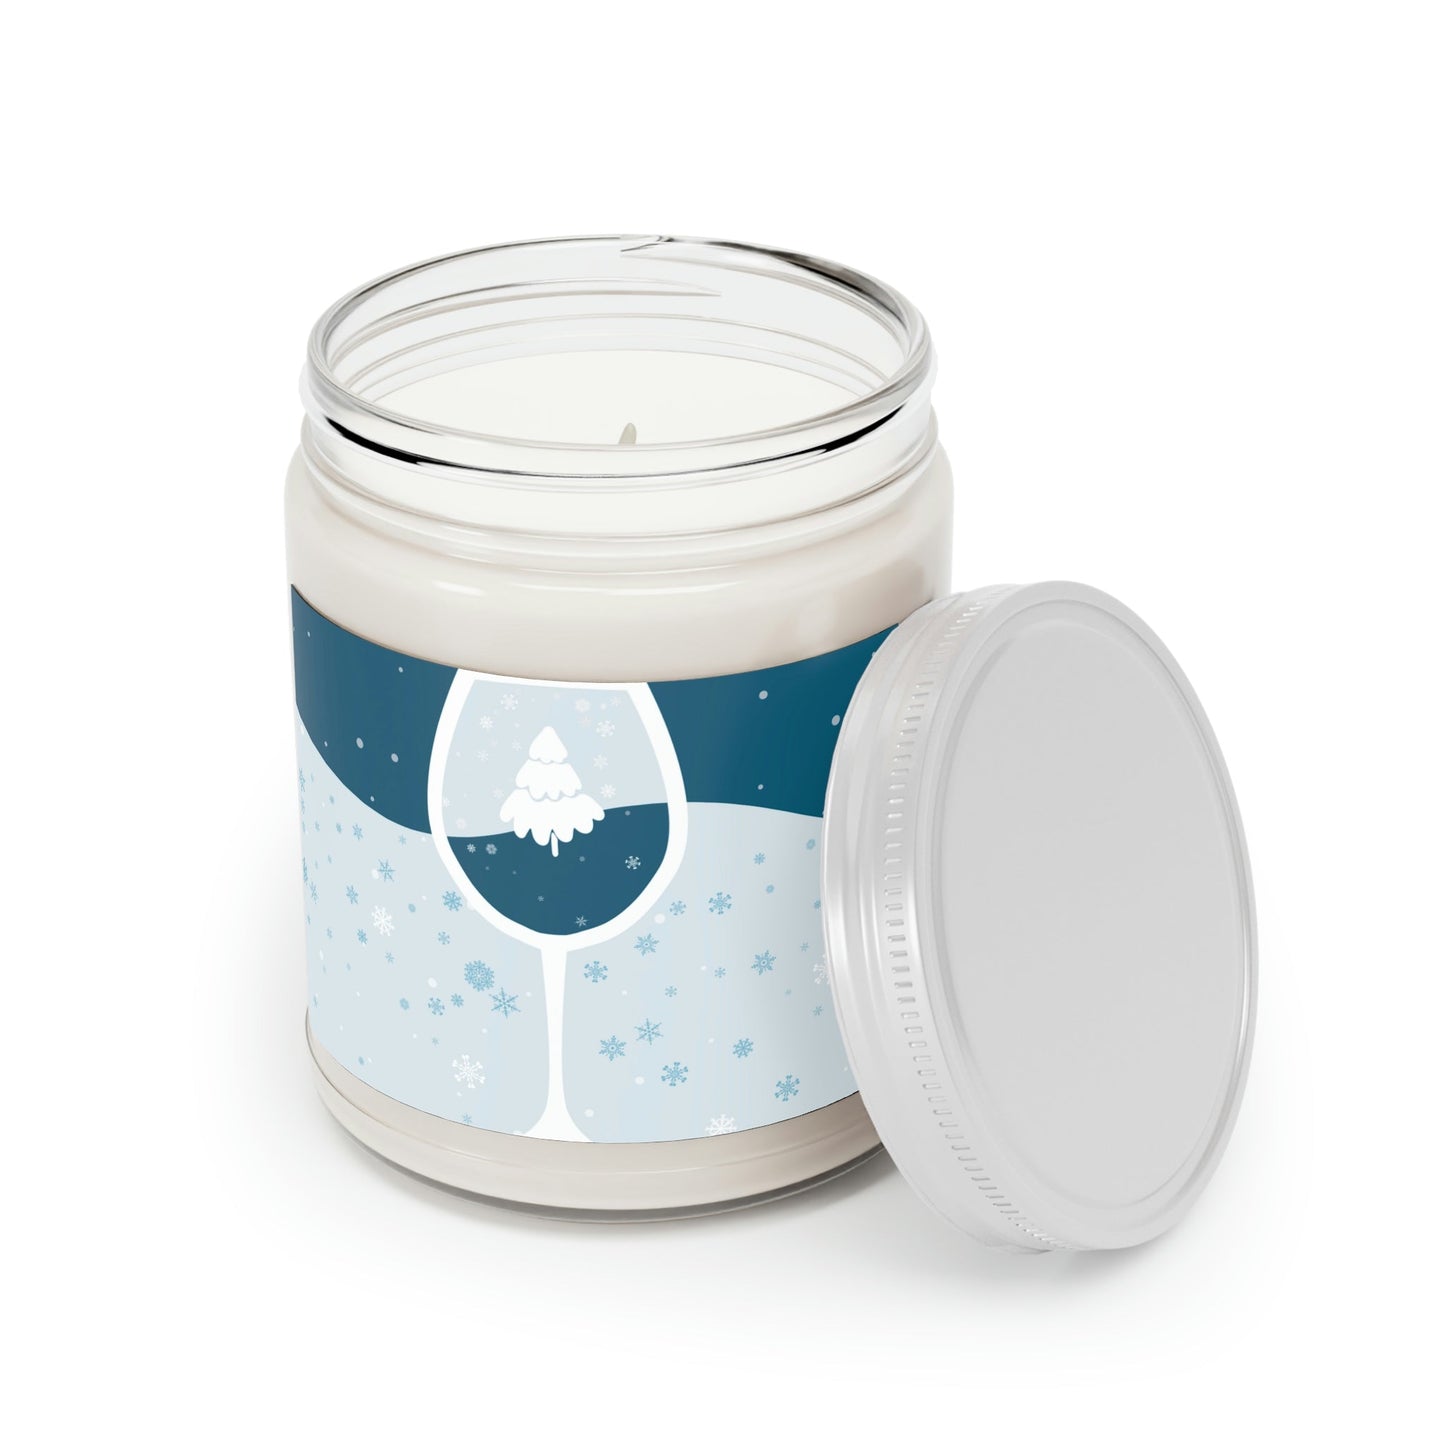 Ice Wine Winter Holidays Scented Candle Up to 60hSoy Wax 9oz Ichaku [Perfect Gifts Selection]